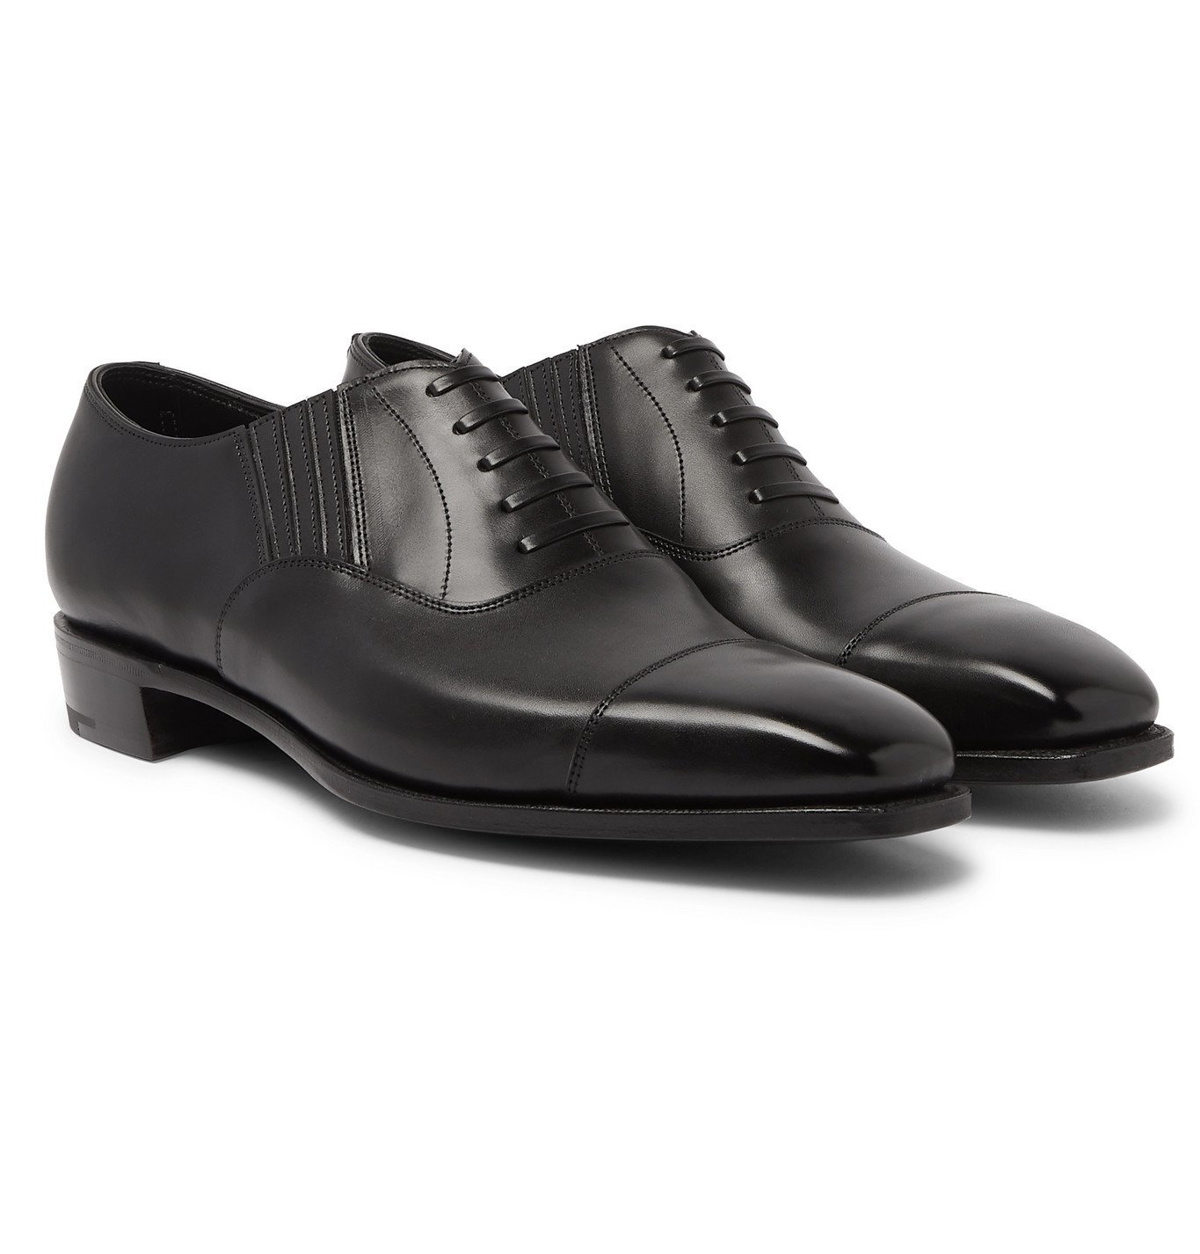 George Cleverley - Bodie II Leather Oxford Shoes - Black George Cleverley